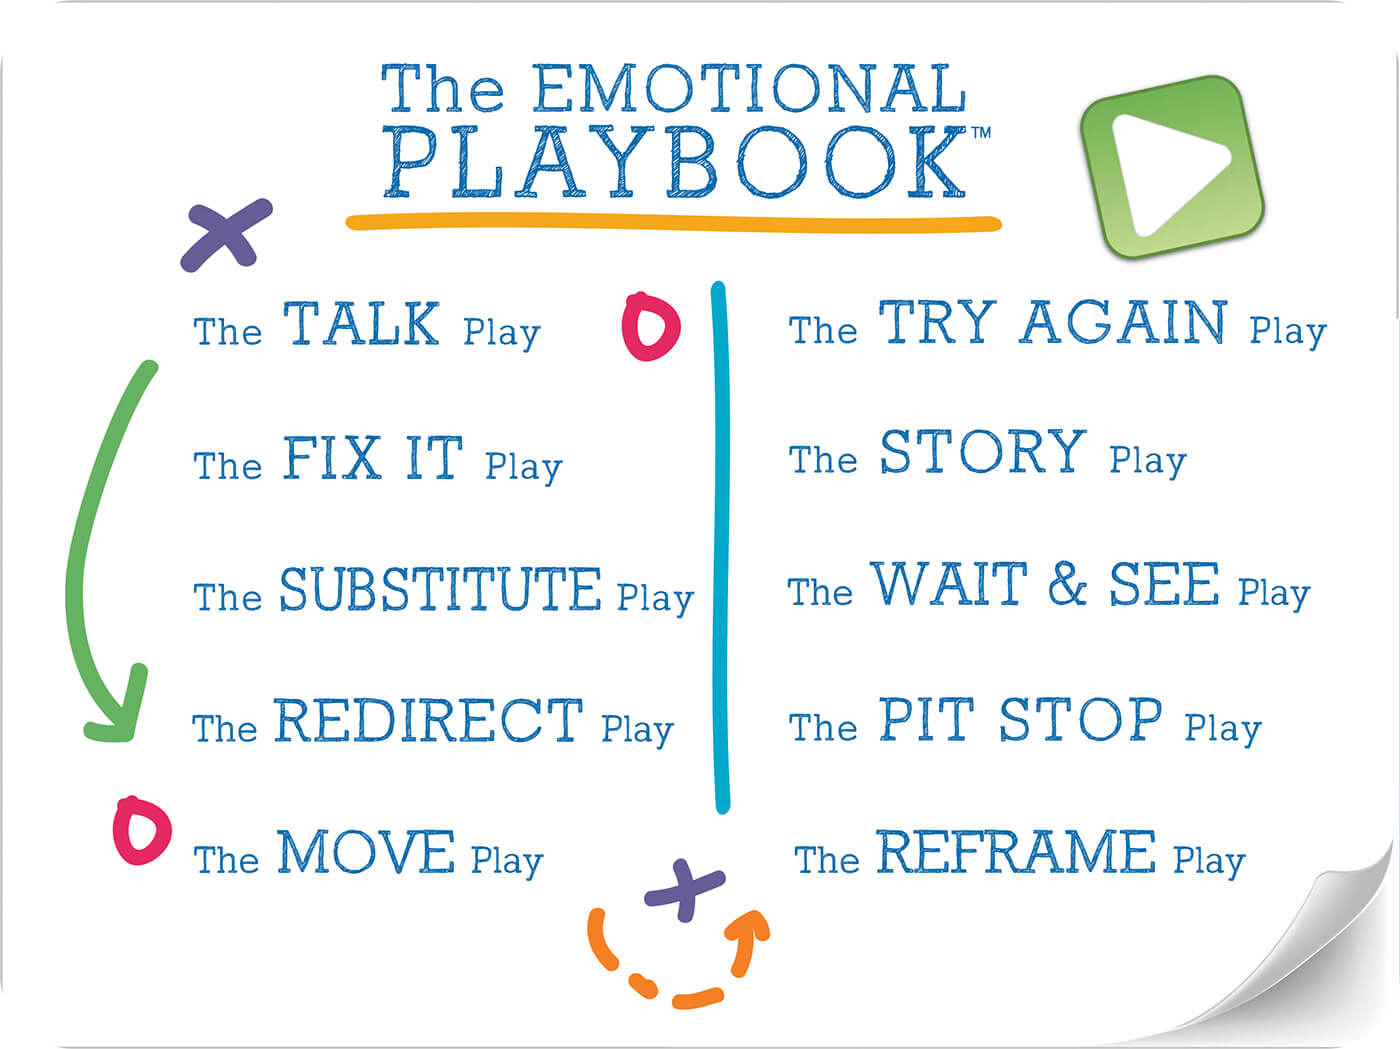 The Emotional Playbook